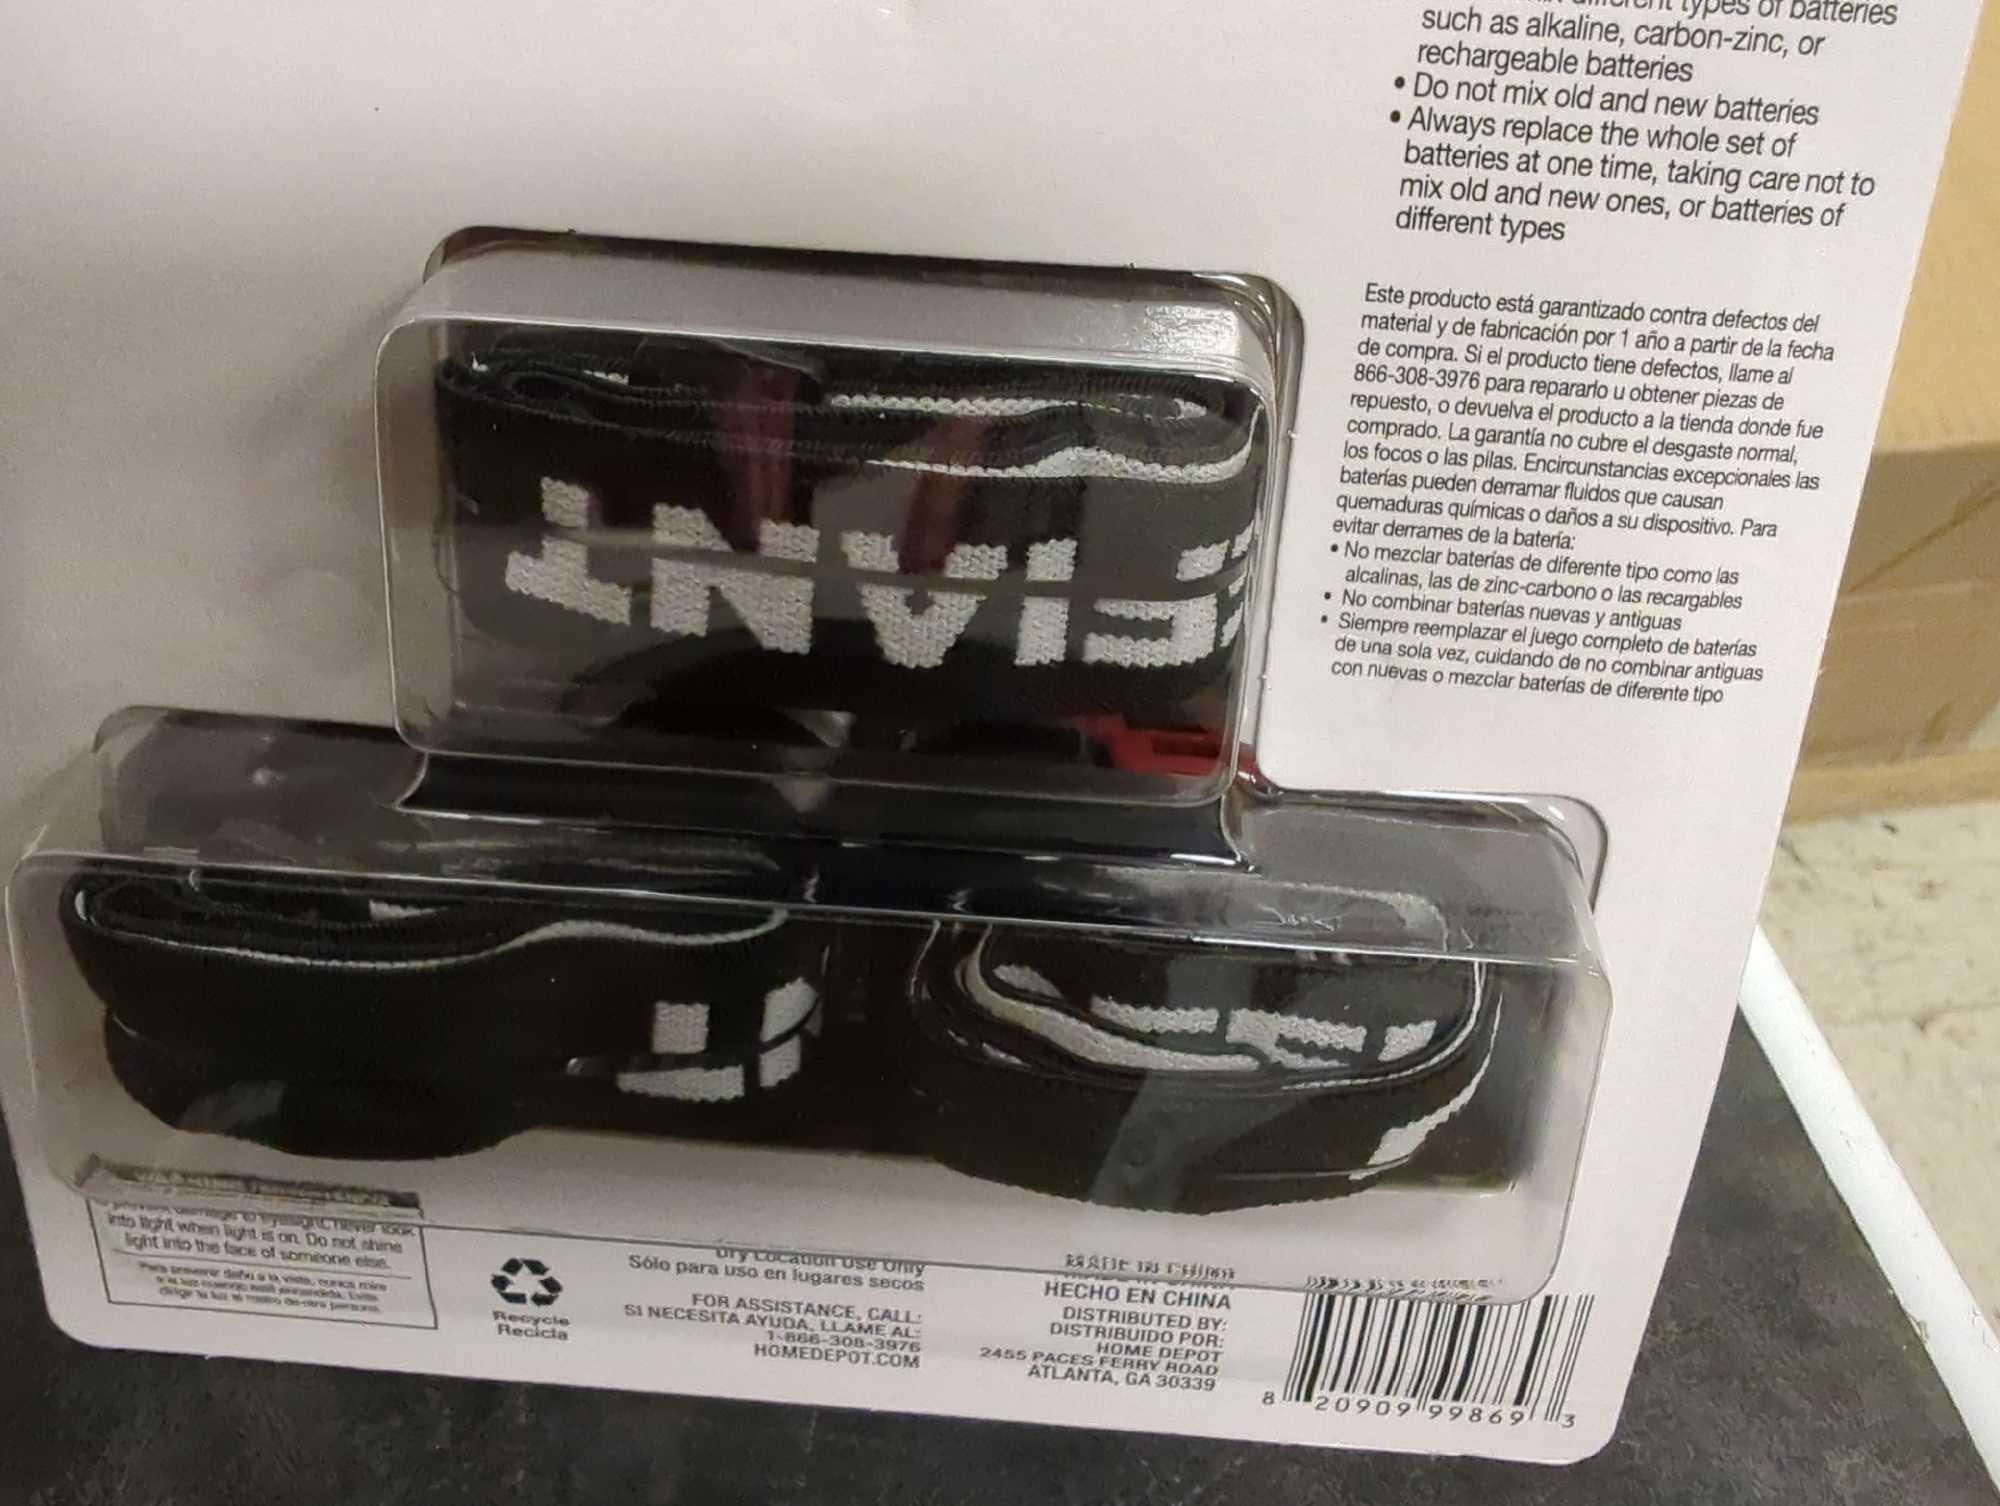 Lot of 2 Defiant 100 Lumens LED Headlight Combo, Appears to be New in Factory Sealed Package Retail